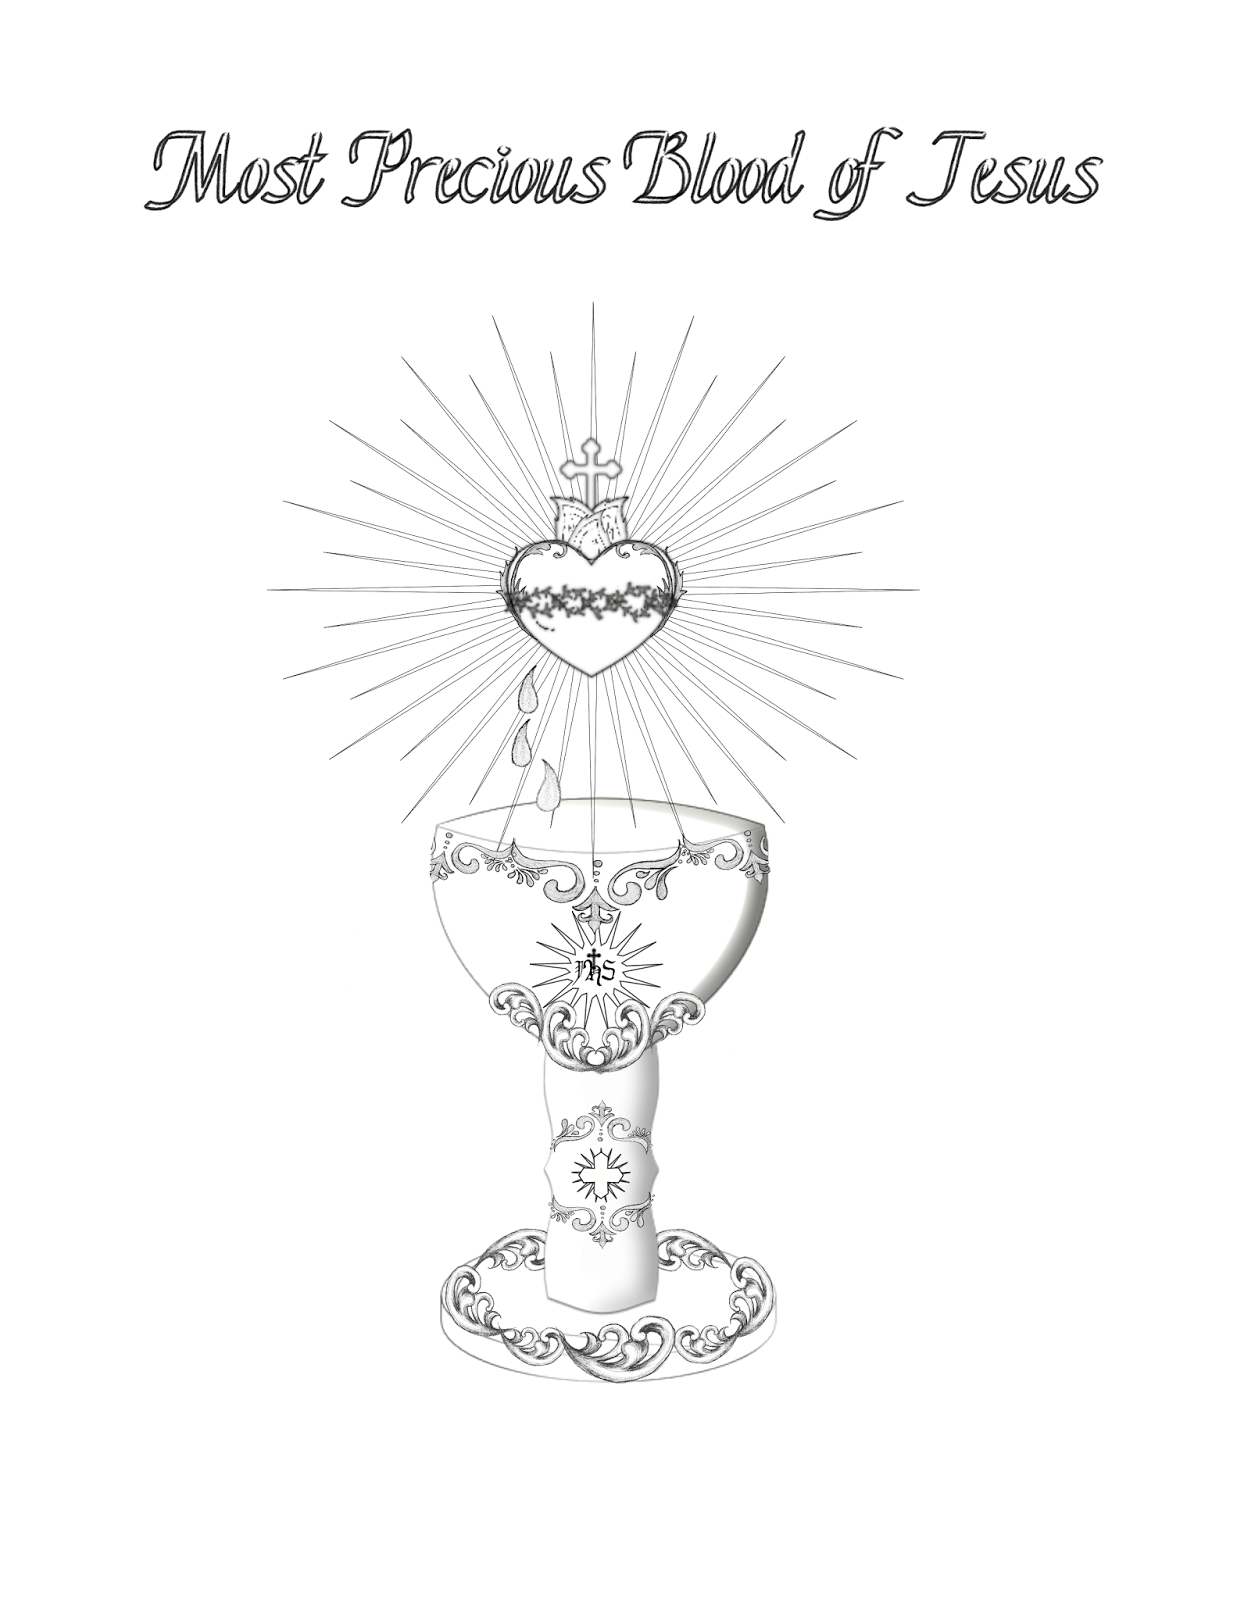 Life, Love, & Sacred Art: FREE Precious Blood of Jesus Coloring Page